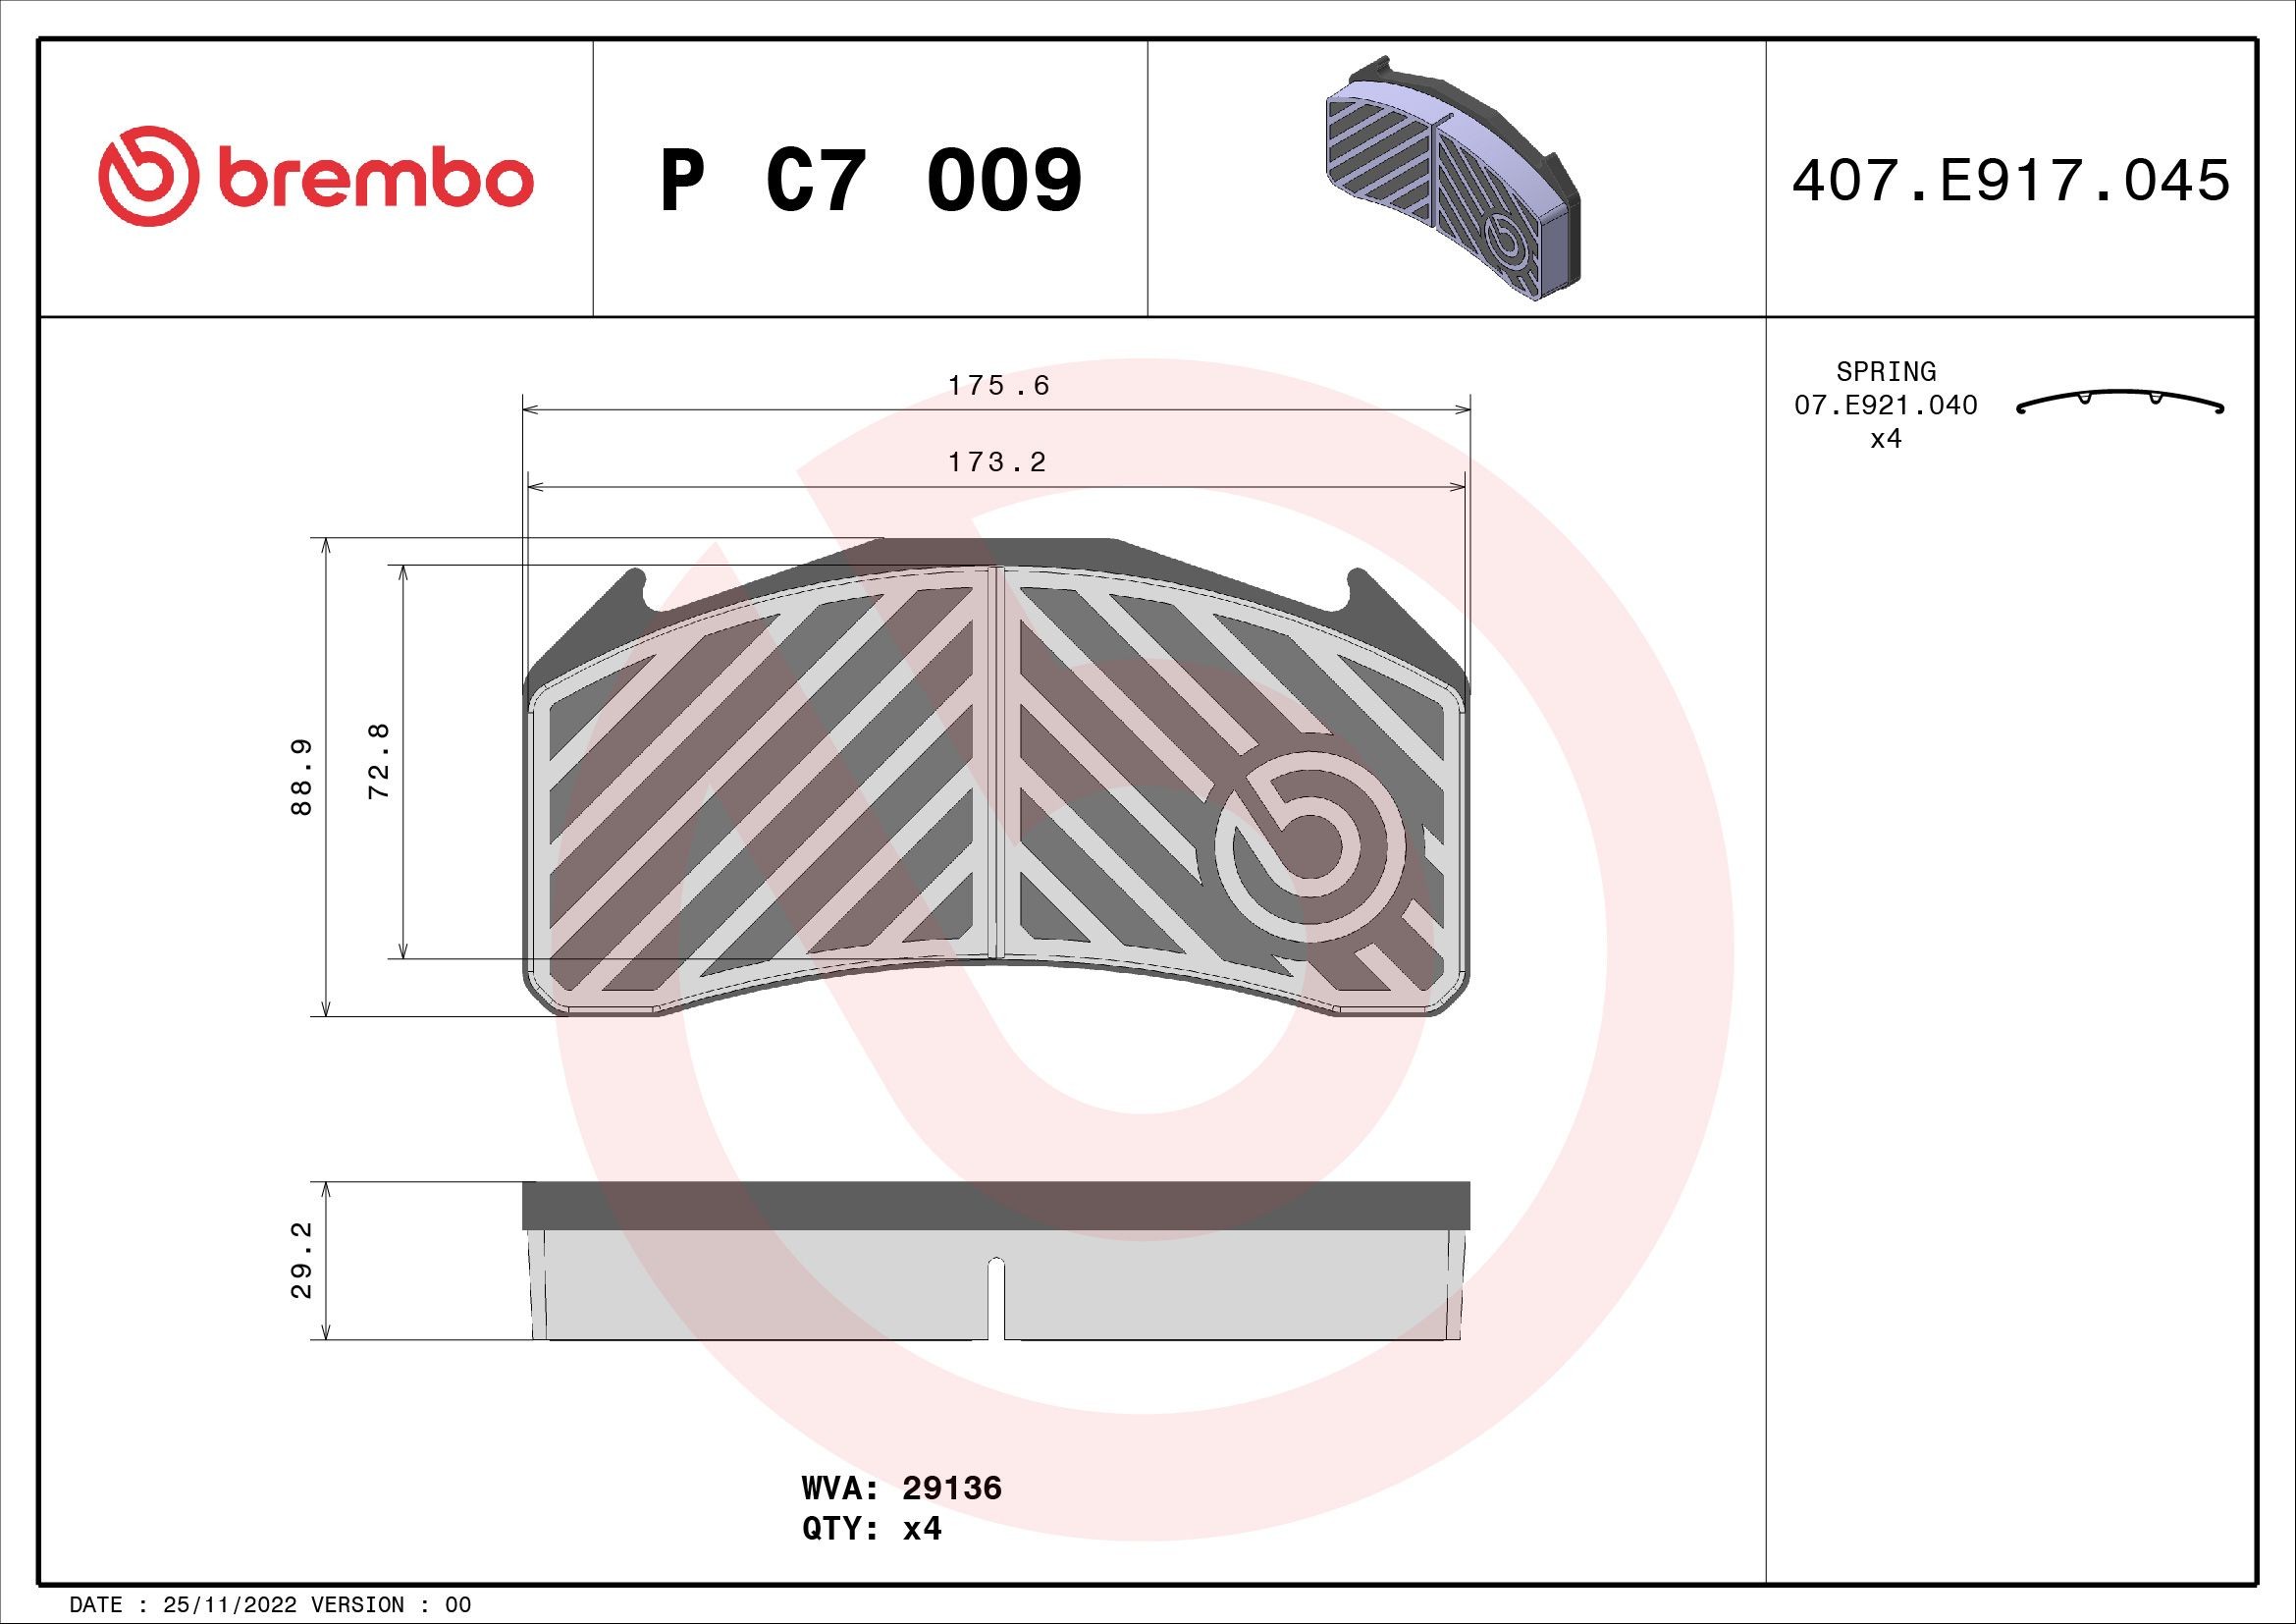 BREMBO P C7 009 Brake pad set excl. wear warning contact, with accessories